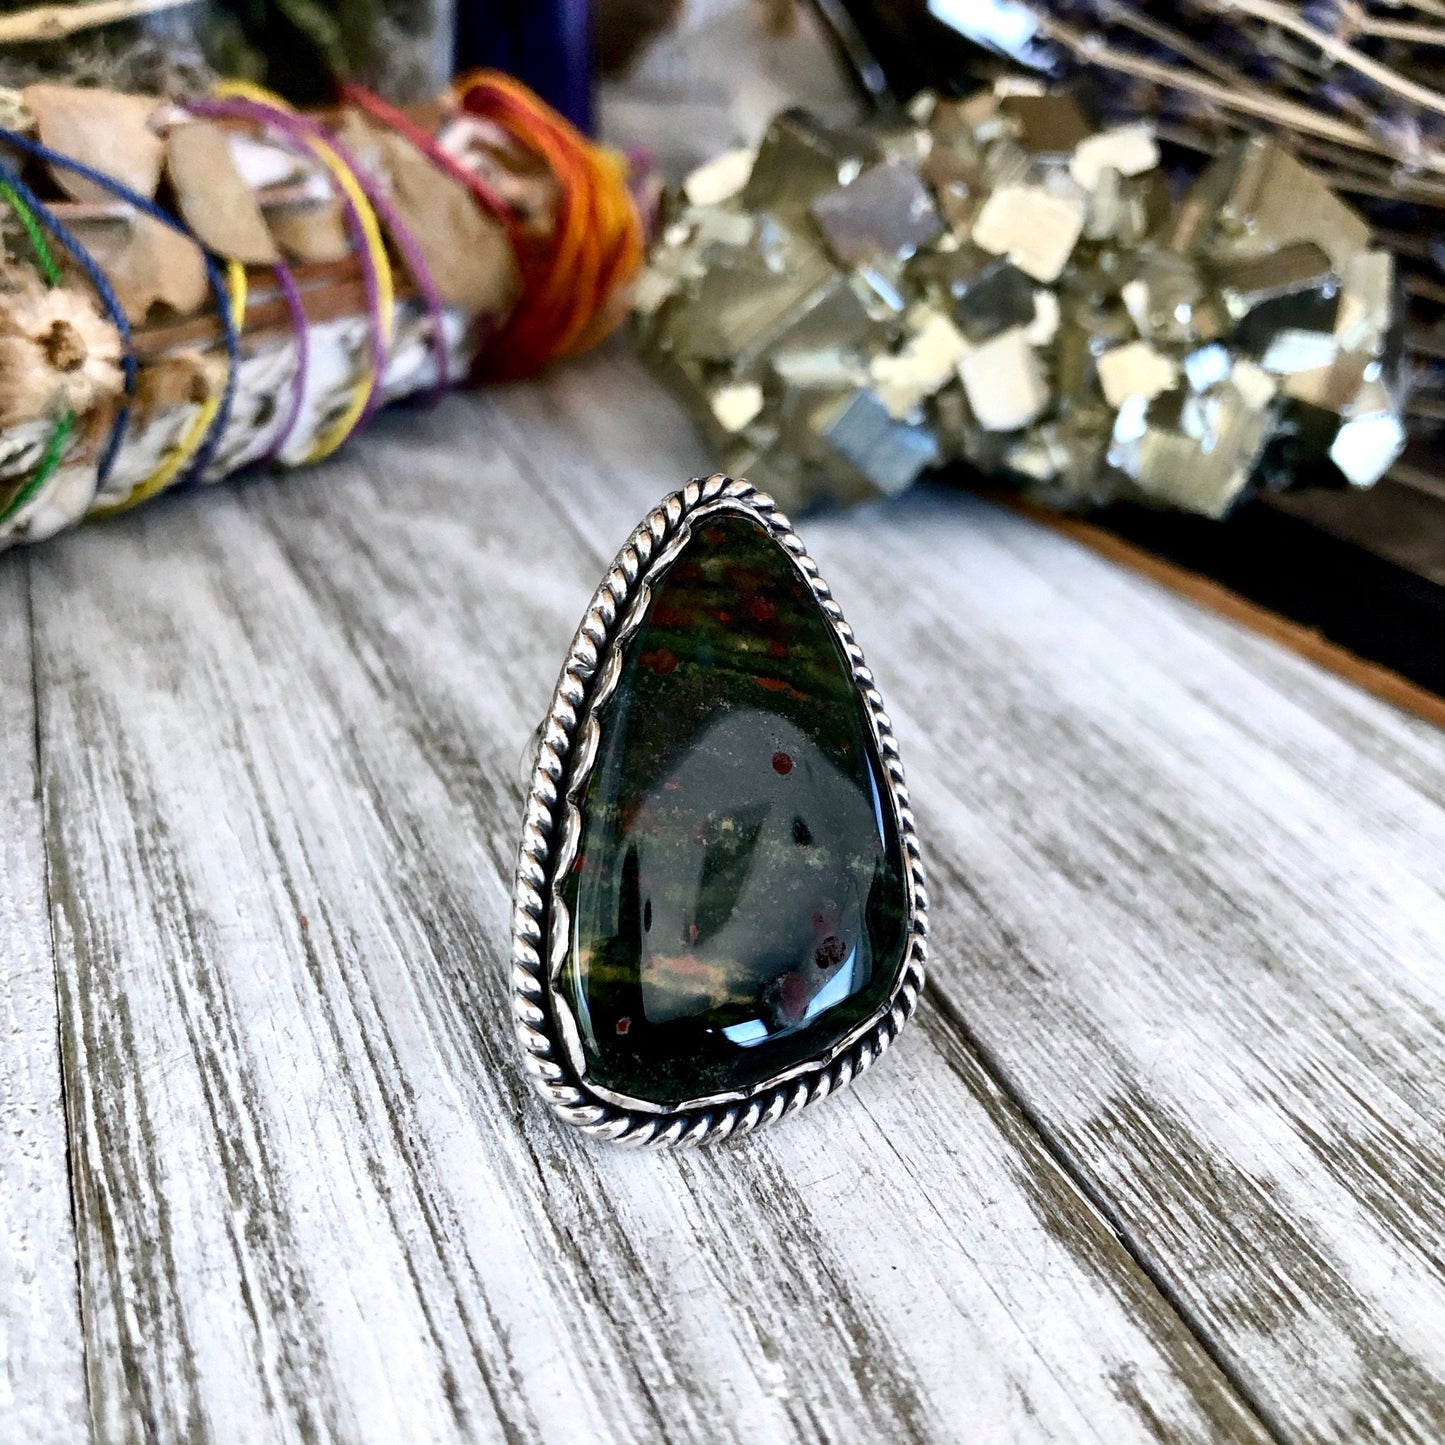 Size 5 Bloodstone Statement Ring Set in Sterling Silver / Curated by FOXLARK Collection